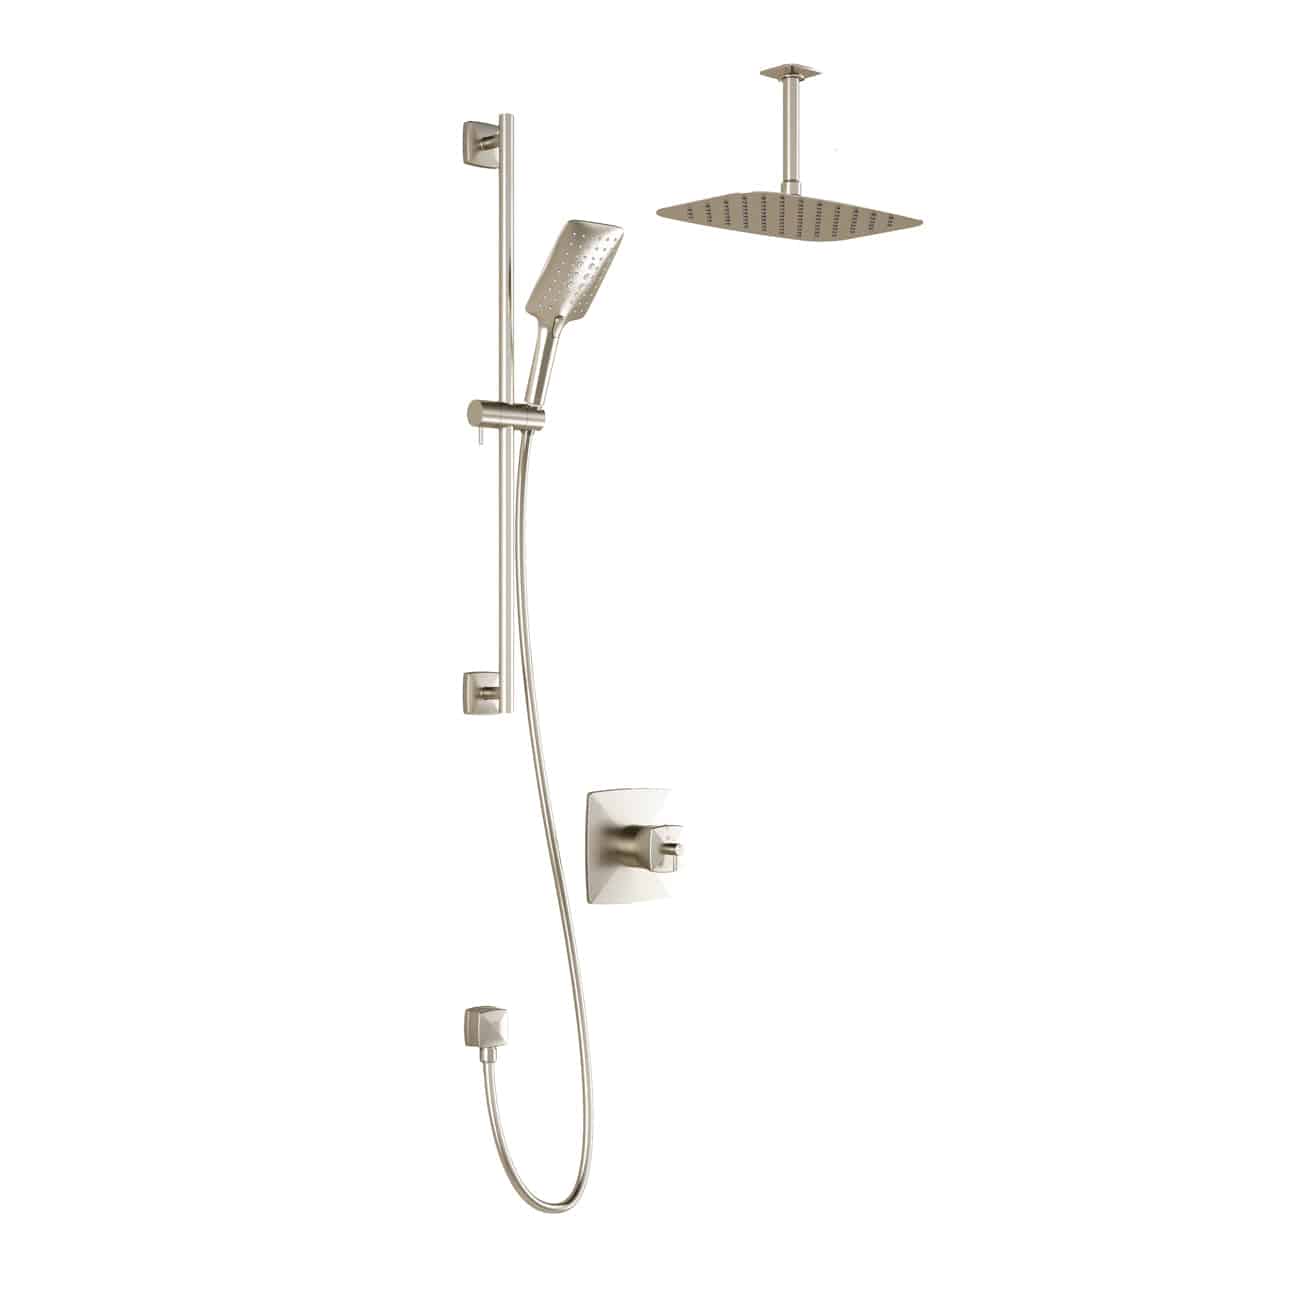 Kalia UMANI TCD1 PREMIA AQUATONIK T/P Coaxial Shower System with 11-3/4" Shower Head with Vertical Ceiling Arm- Brushed Nickel PVD